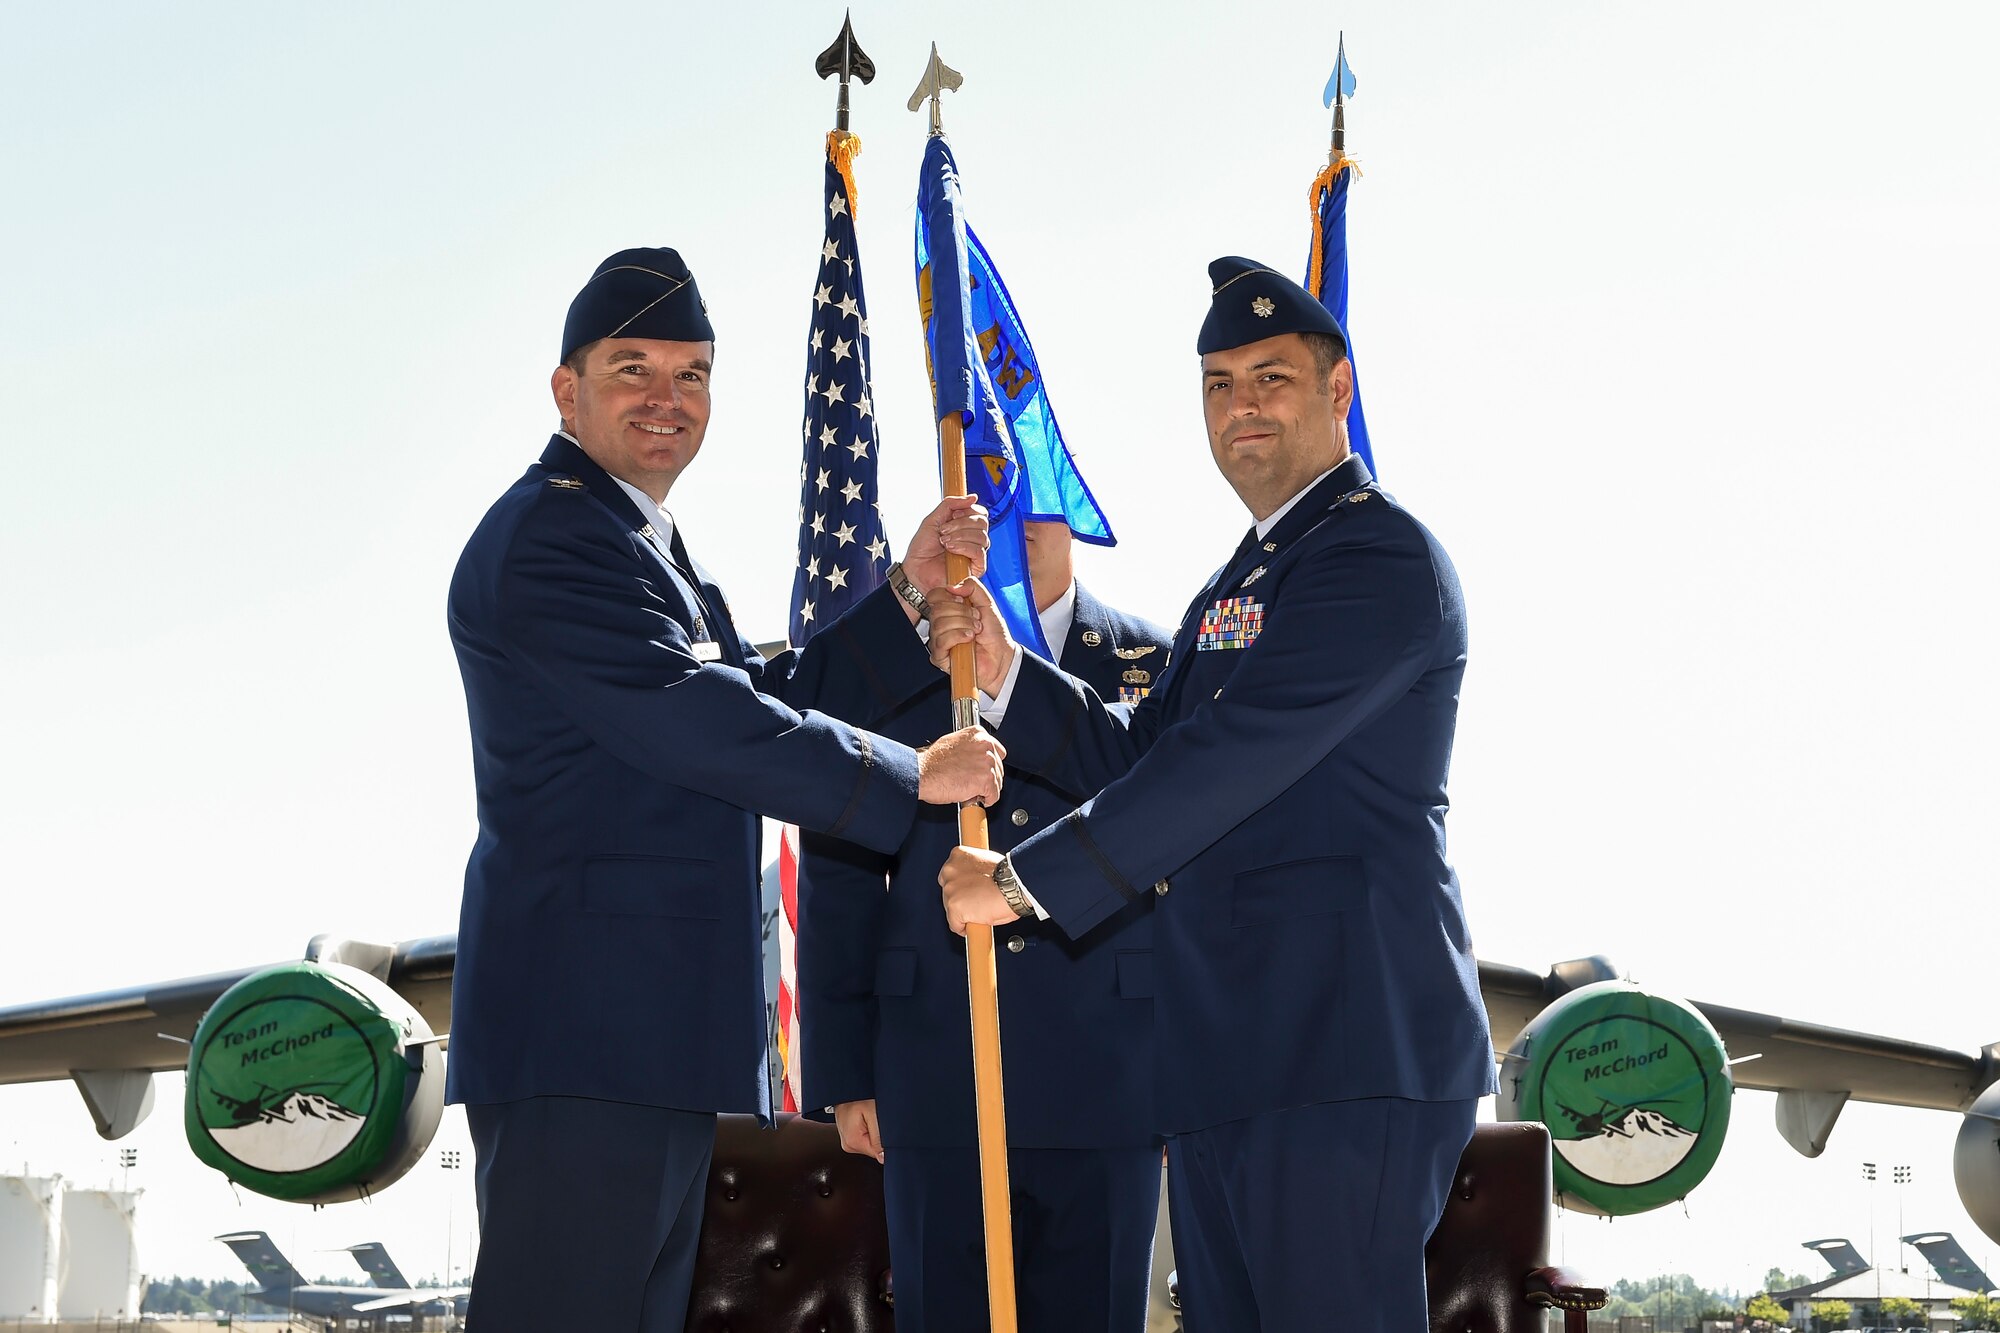 Lt. Col. Nathan Campbell (right), former 10th Airlift Squadron Commander, passes the 10th AS guidon to Col. David Owens (left), 62nd Operations Group commander May 6, 2016, during the 10th AS inactivation ceremony at Joint Base Lewis-McChord, Wash. The passing of the guidon signified the official inactivation of the unit. (U.S. Air Force photo/Tech. Sgt. Sean Tobin)